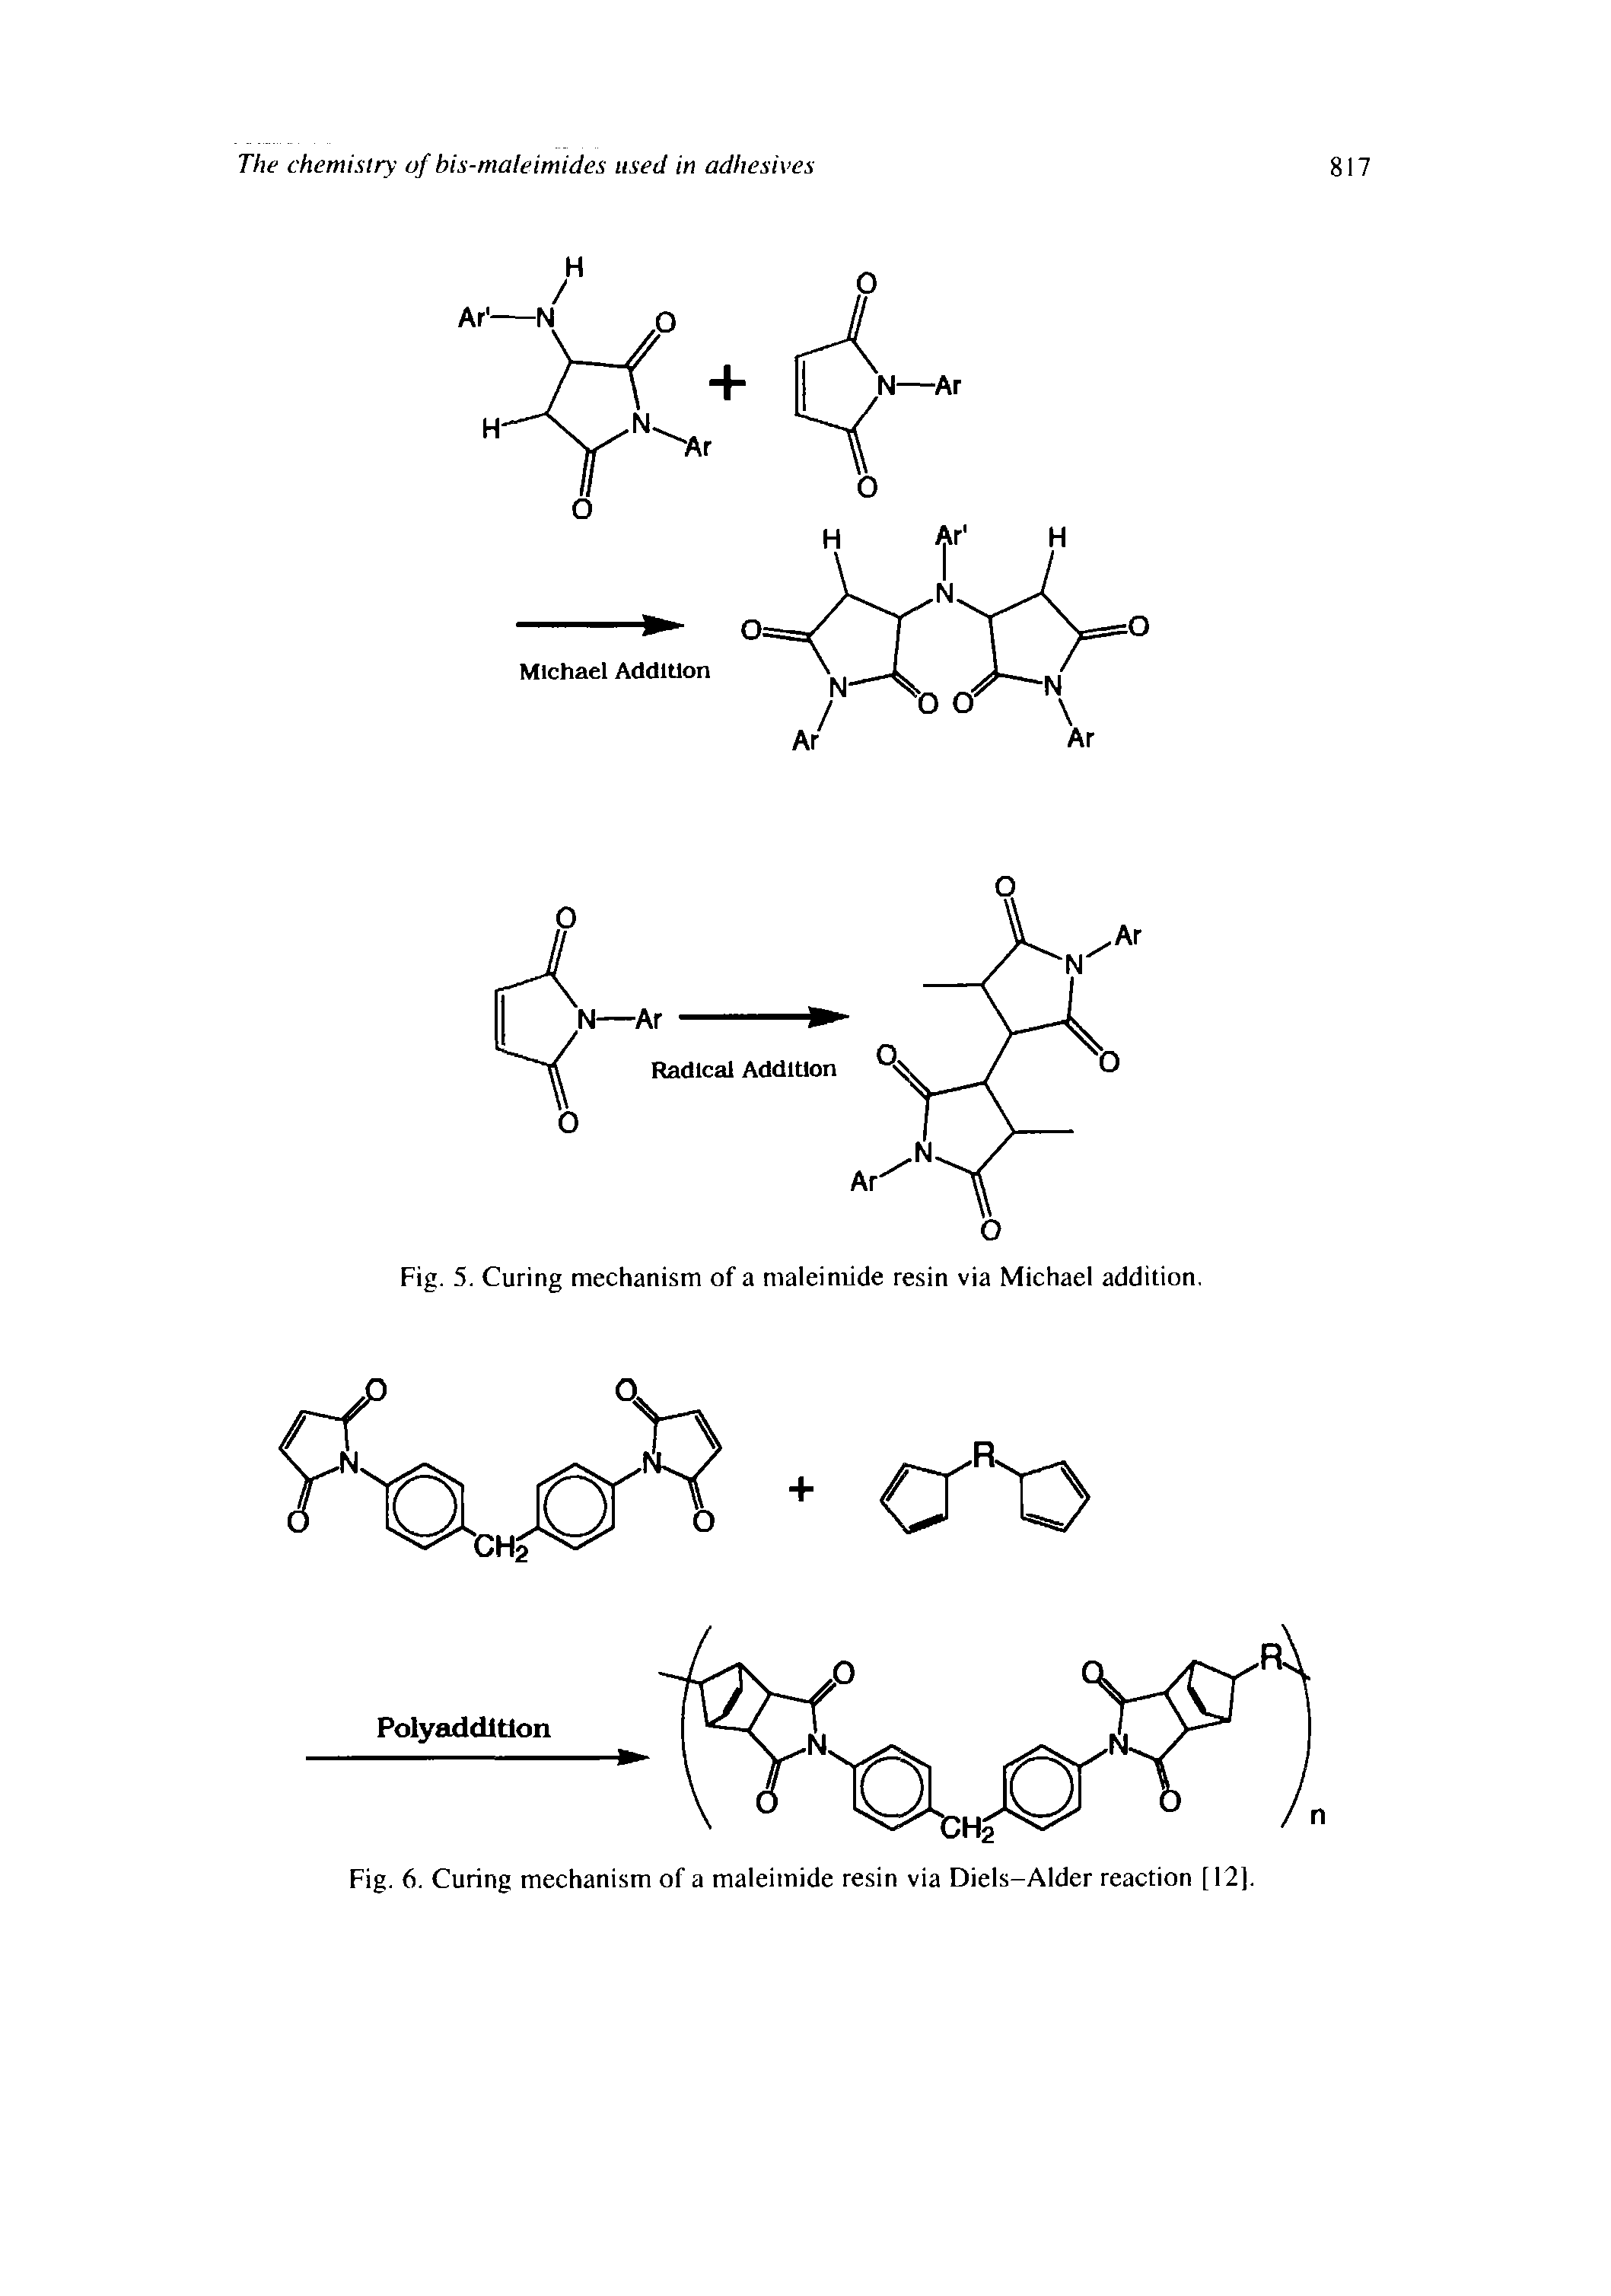 Fig. 5. Curing mechanism of a maleimide resin via Michael addition.